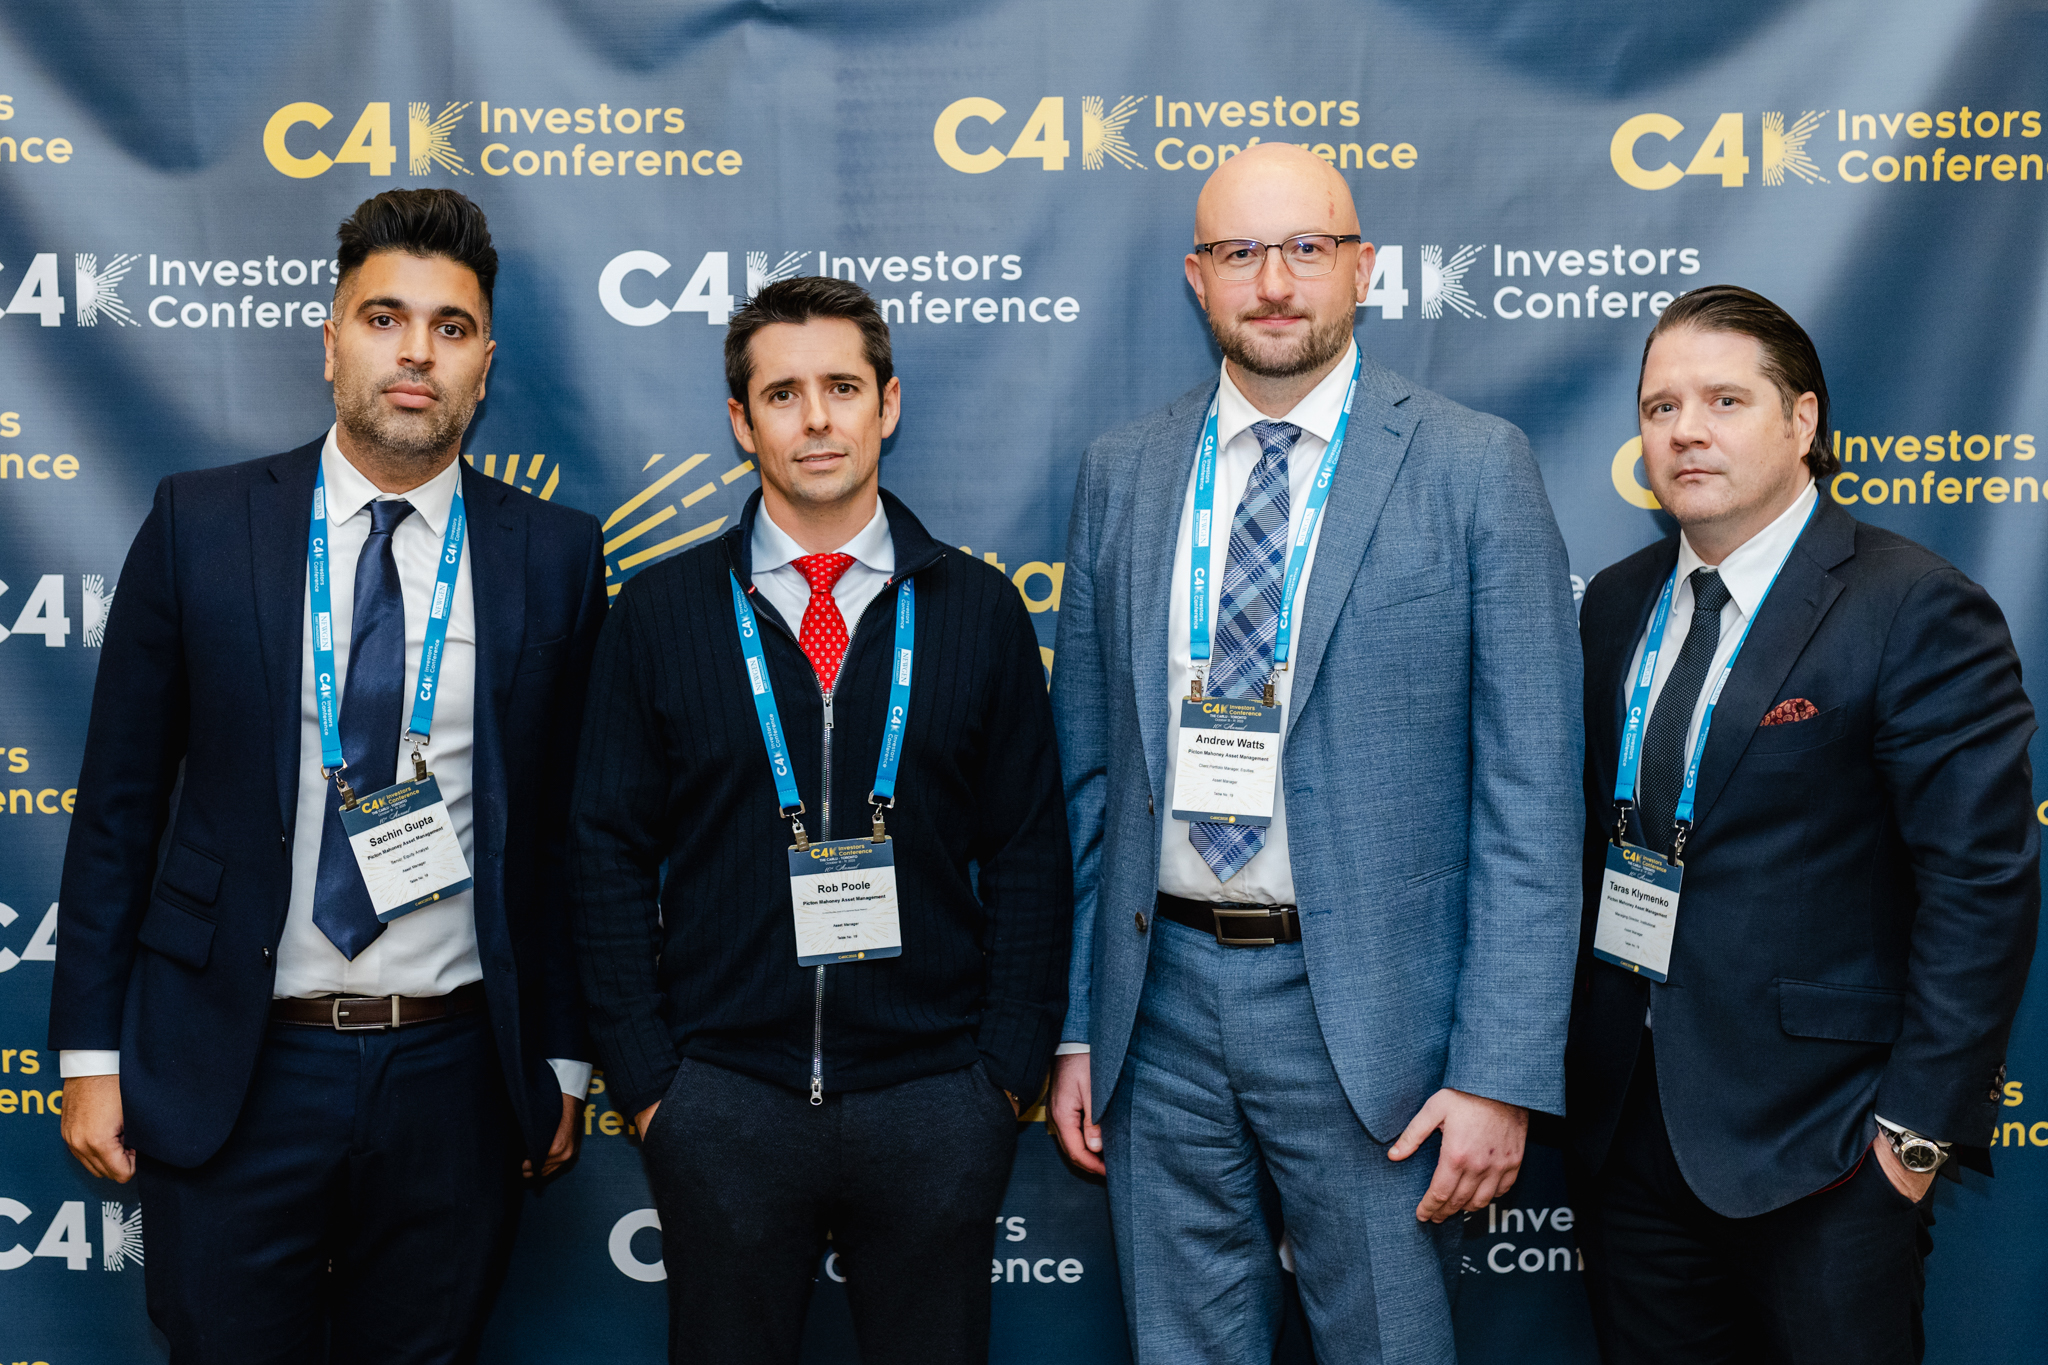 Four men in suits posing for a photo at the conference.